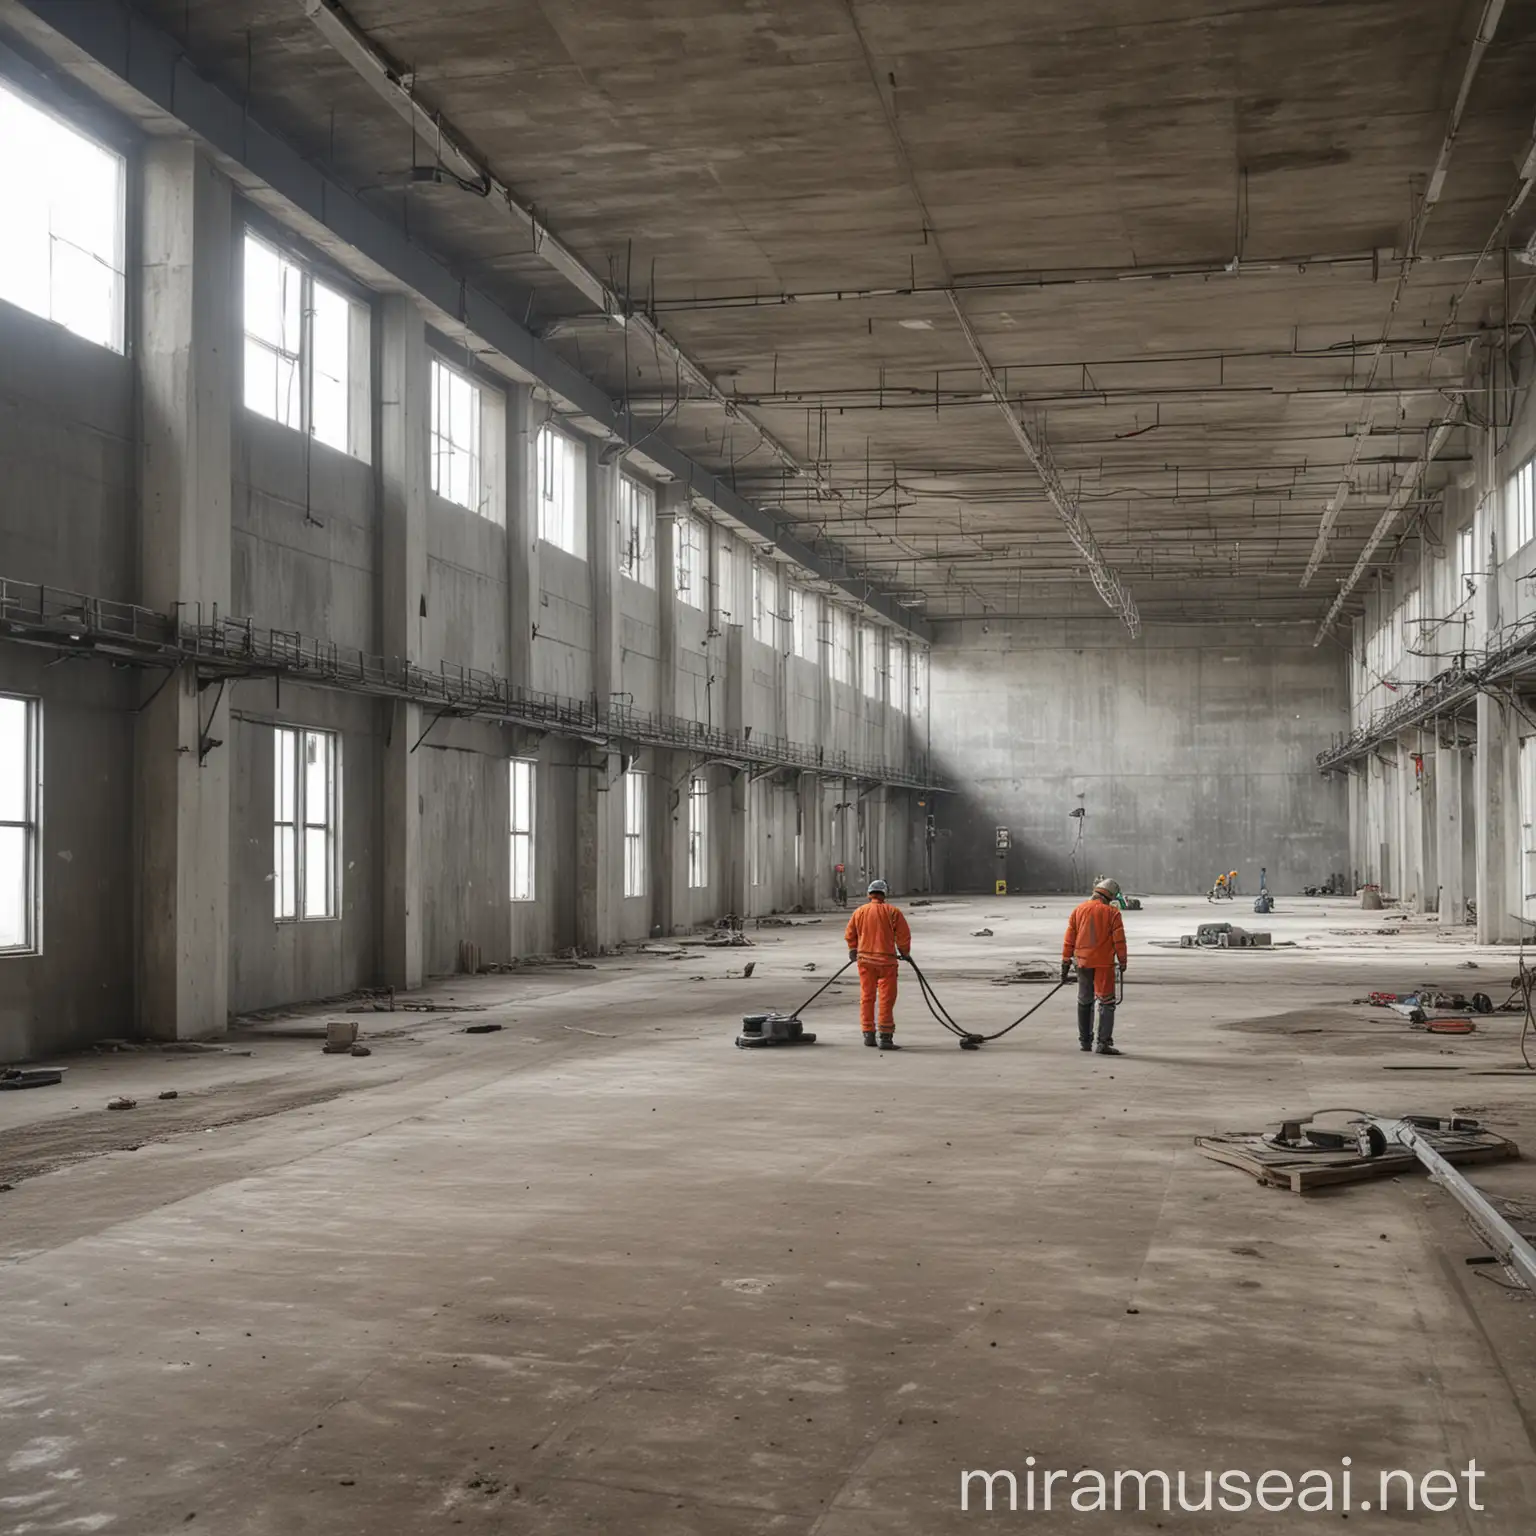 FourFloor Industrial Construction Site with Visible Workers Vacuuming